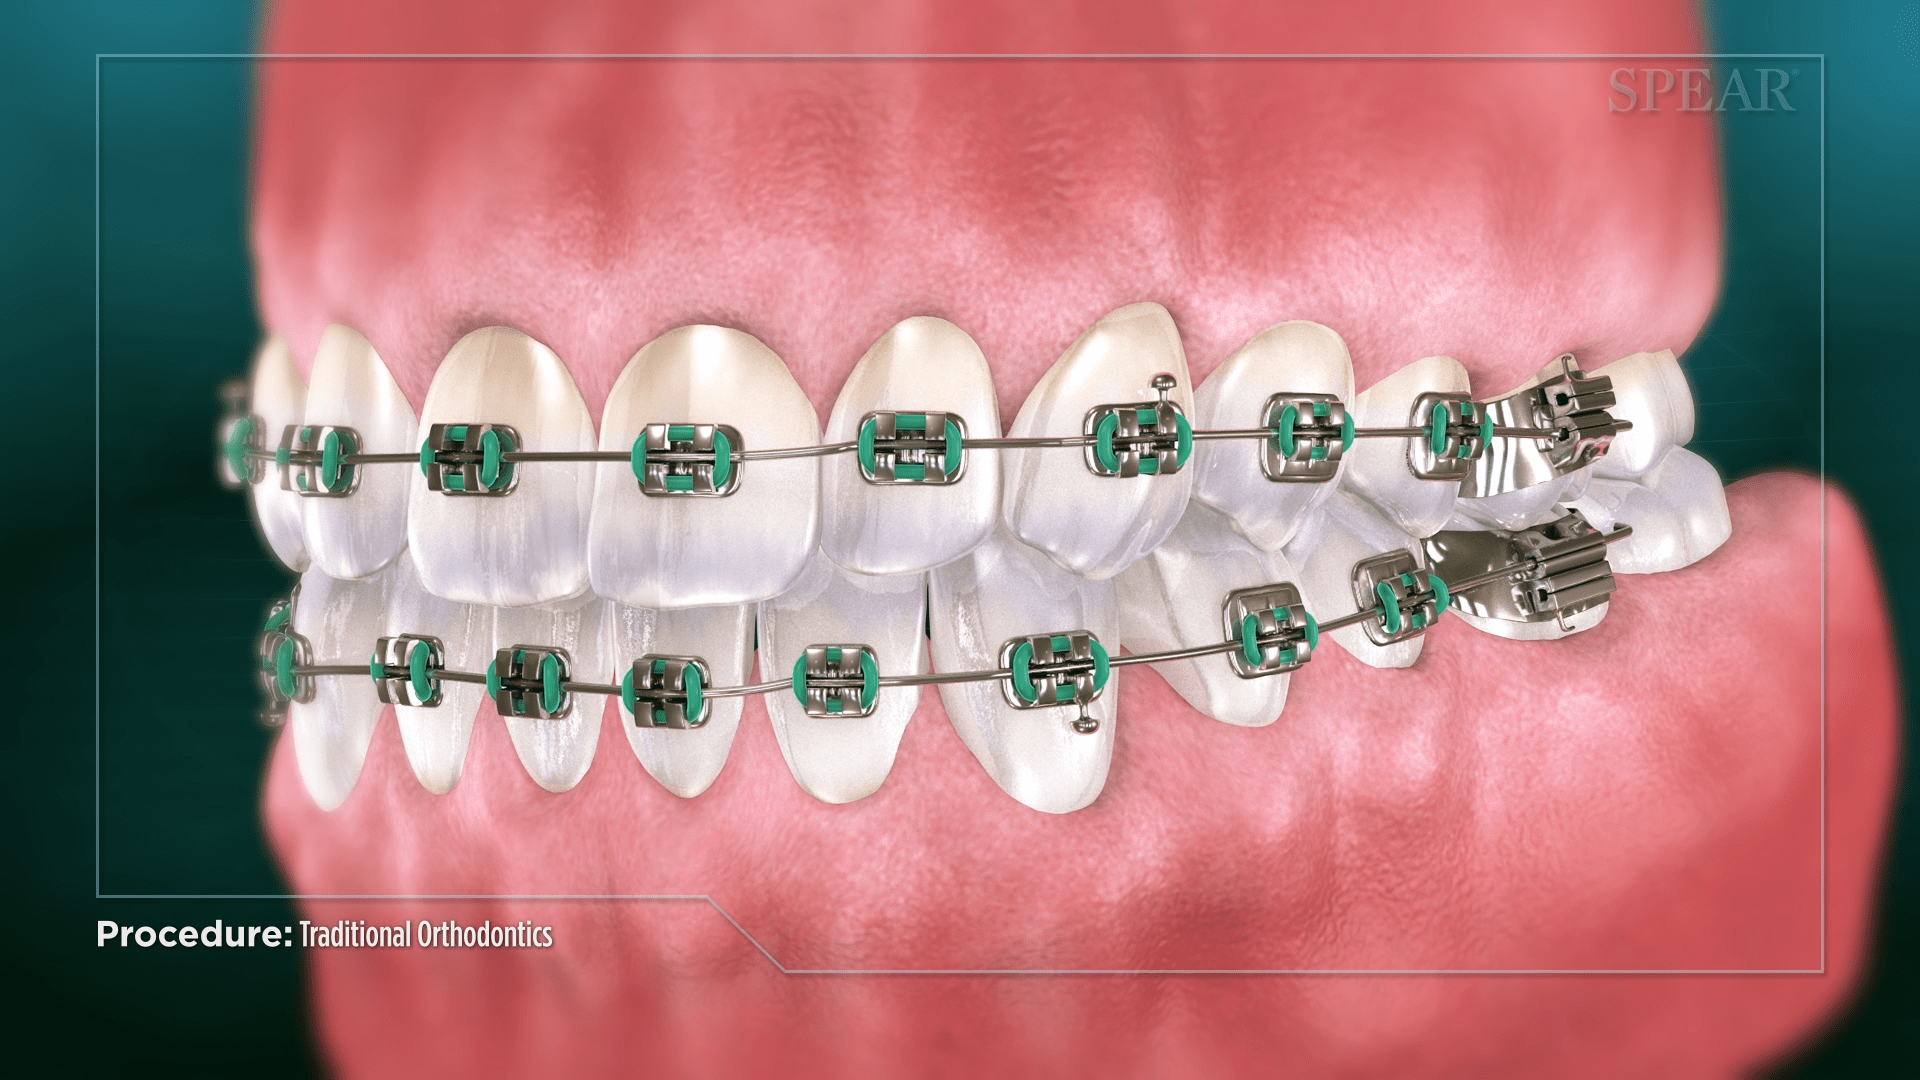 Orthodontic Treatment Over Conventional Dental Methods